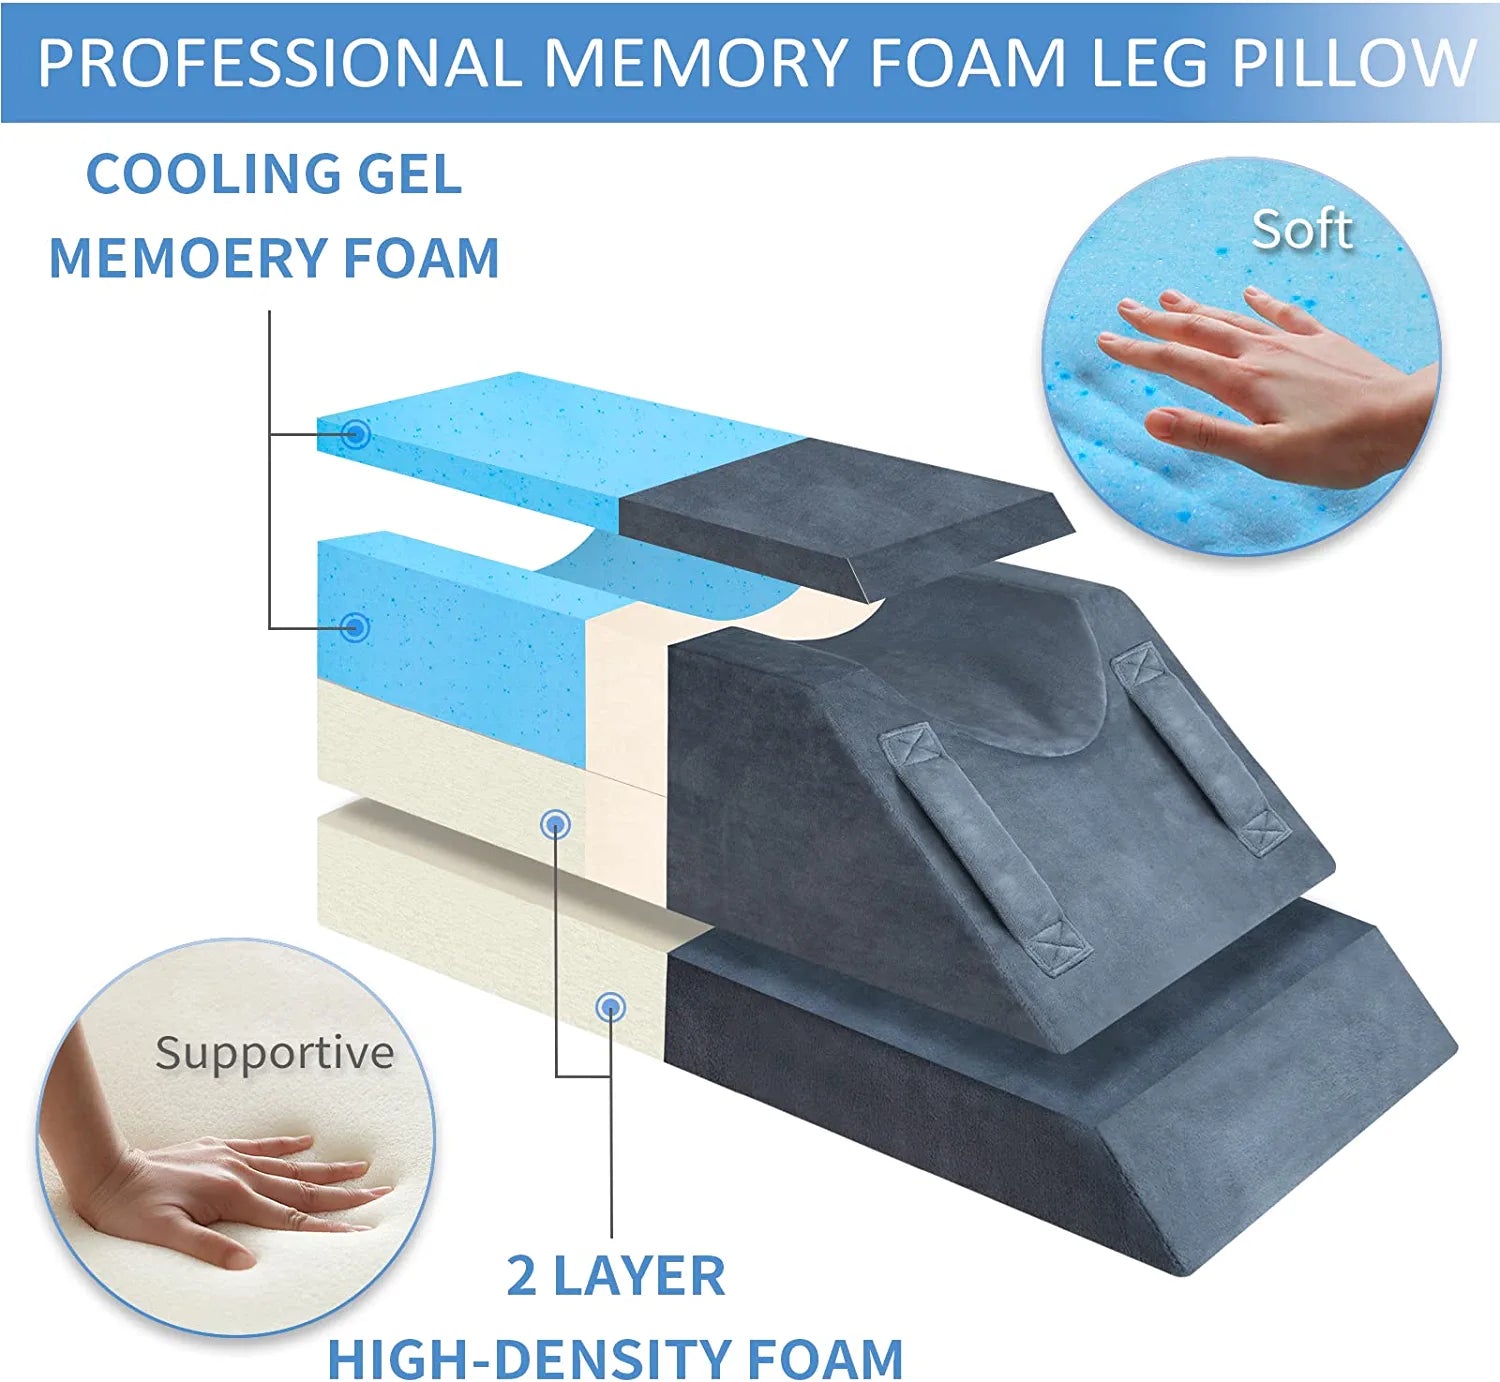 Adjustable Leg Elevation Pillows for Swelling After Surgery, Cooling Memory Foam Leg Wedge Pillow for Blood Circulation, Wedge Pillow for Sleeping